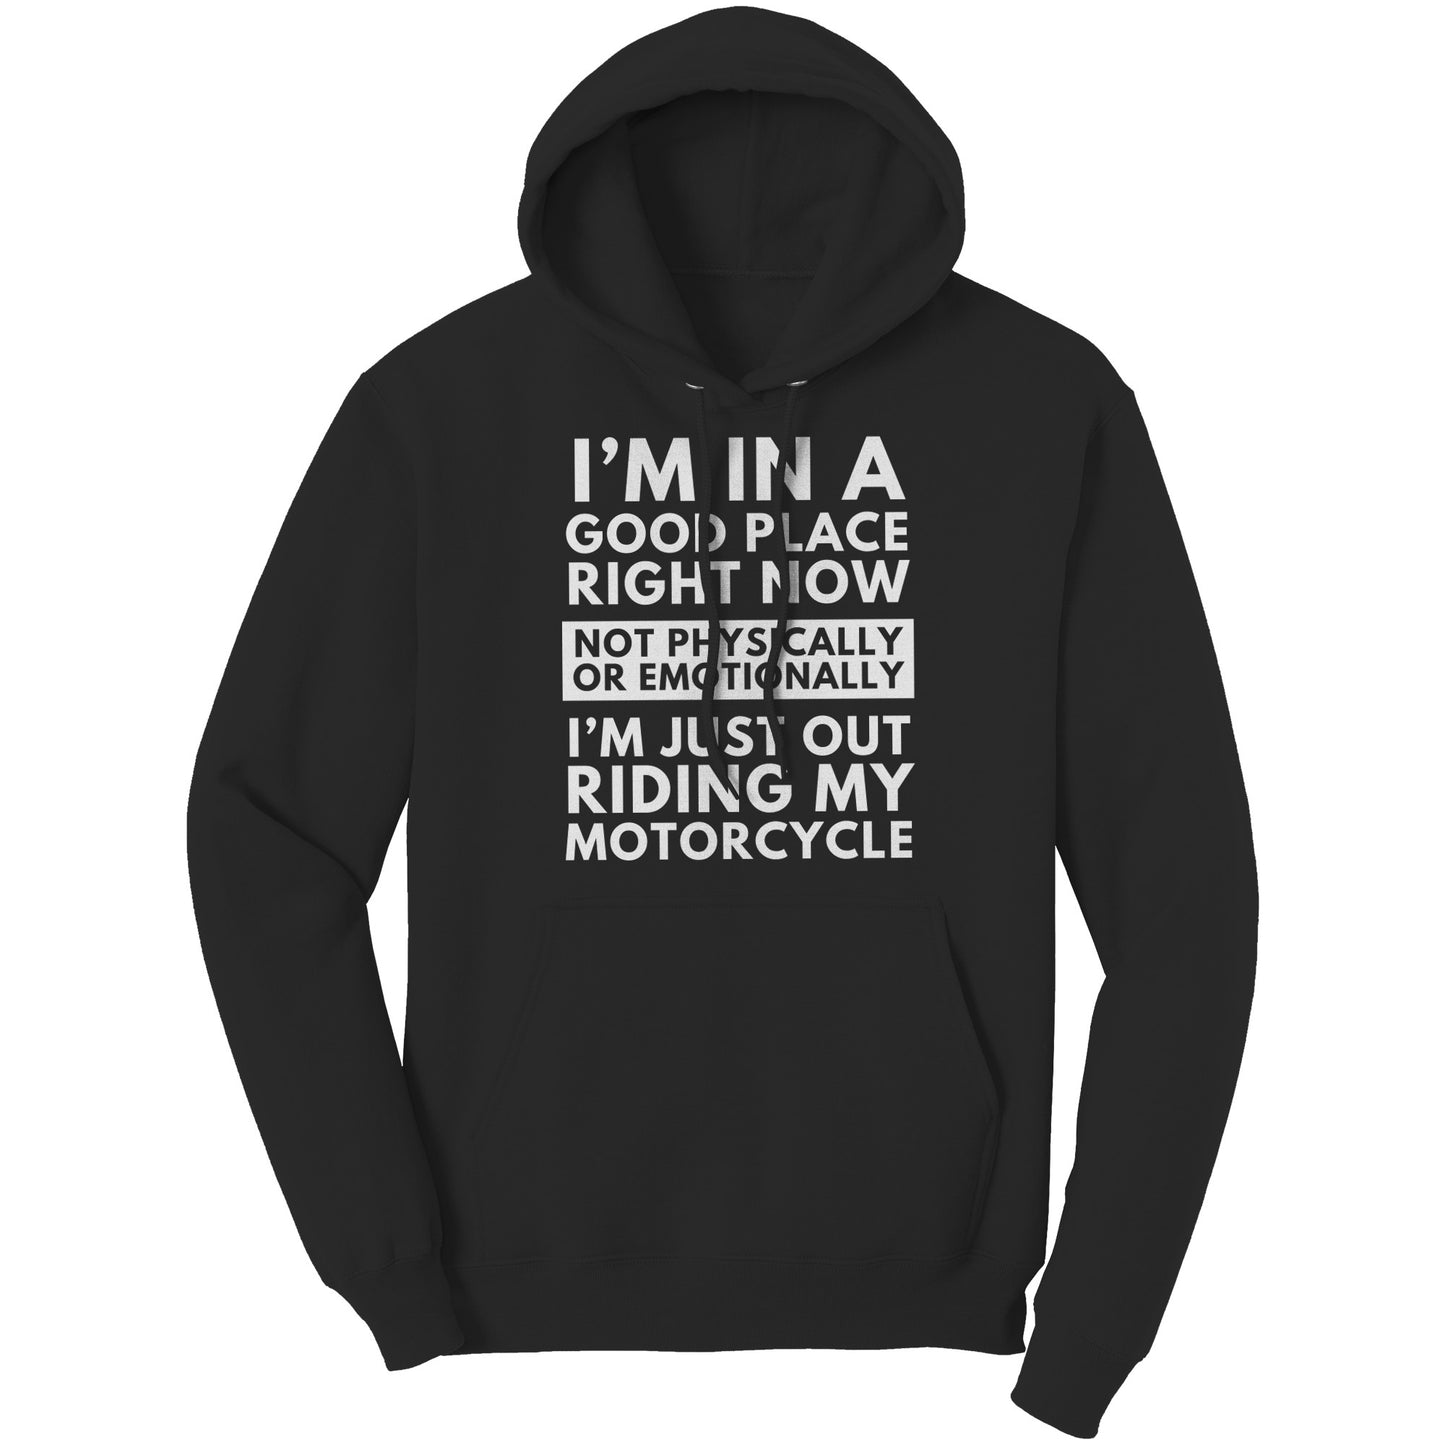 I'm in a Good Place right now, Motorcycle - Standard Hoodie